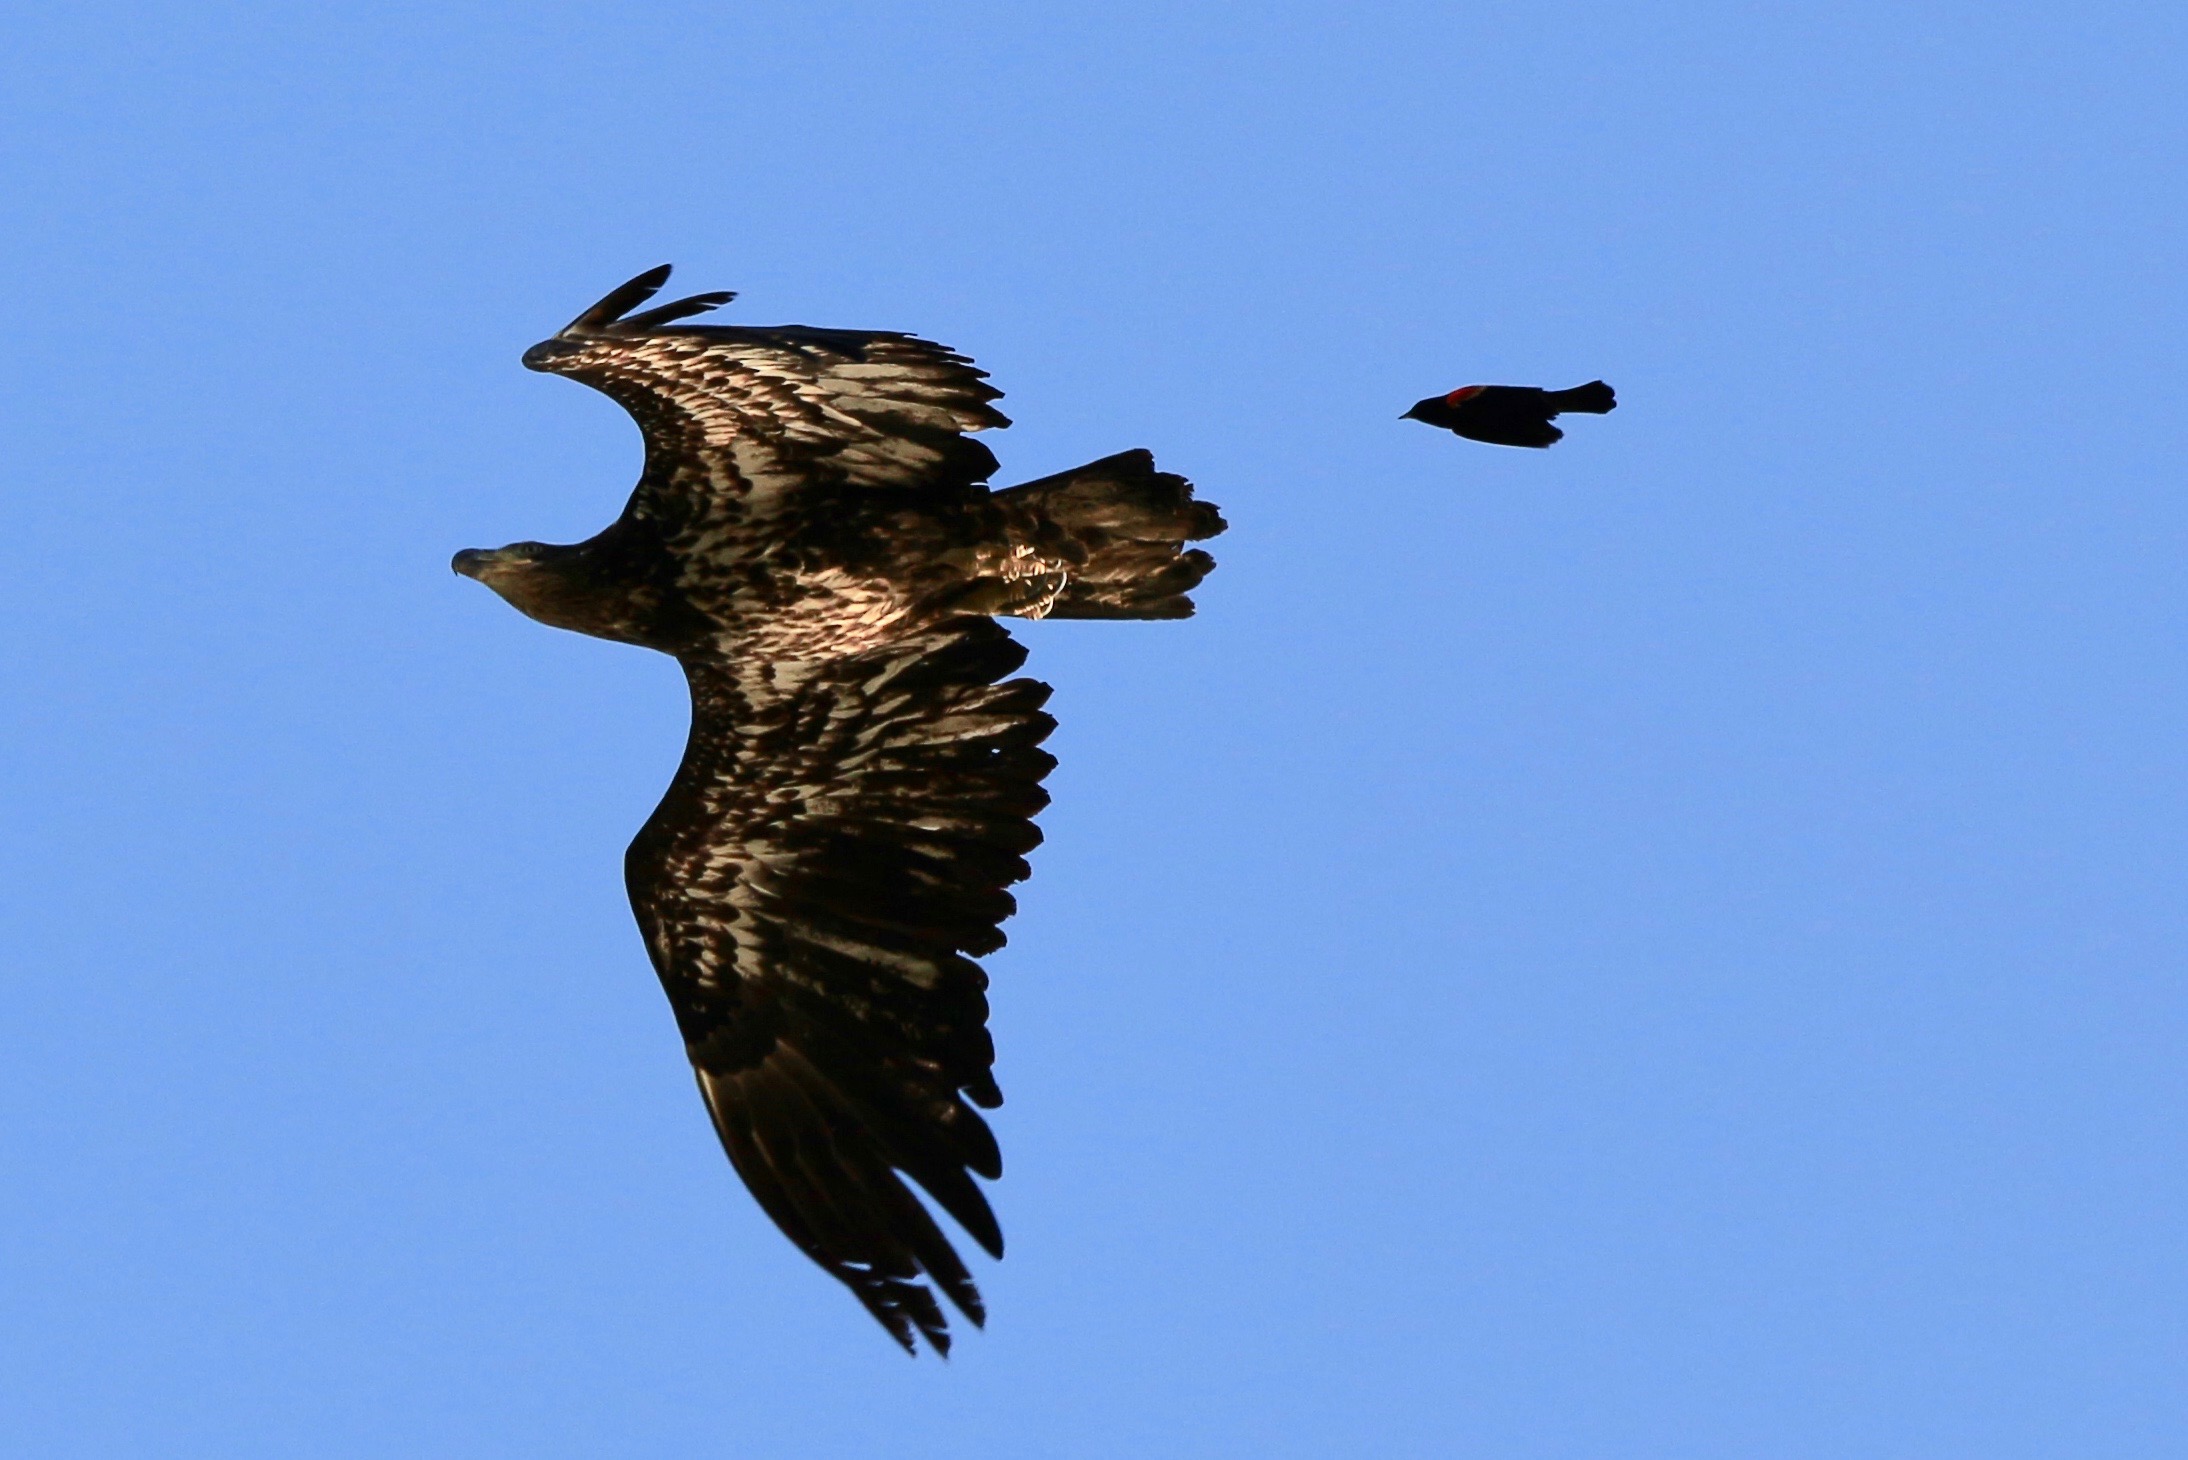 A juvenile bald eagle with streaky brown and white feathers flies directly above me and is being mobbed by a male red-winged blackbird that is much smaller and looks completely silhouetted against the blue sky.
